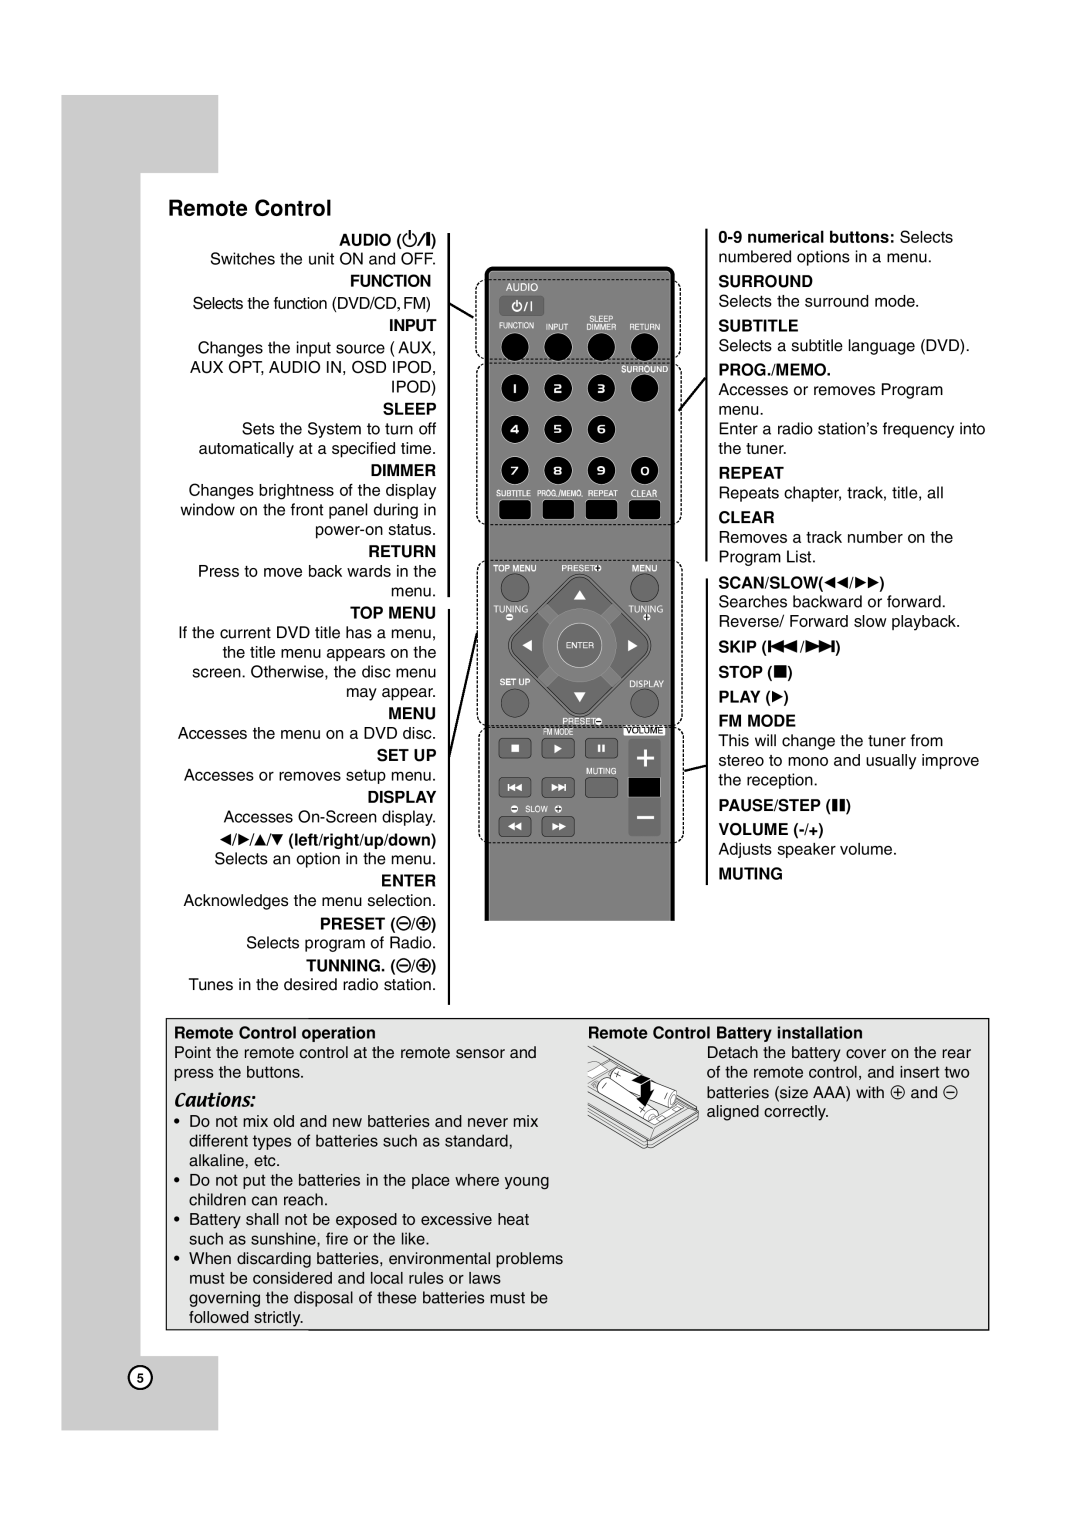 JVC TH-G40 Remote Control, Audio, numerical buttons Selects, Function, Surround, Input, Subtitle, Prog./Memo, Sleep, Clear 